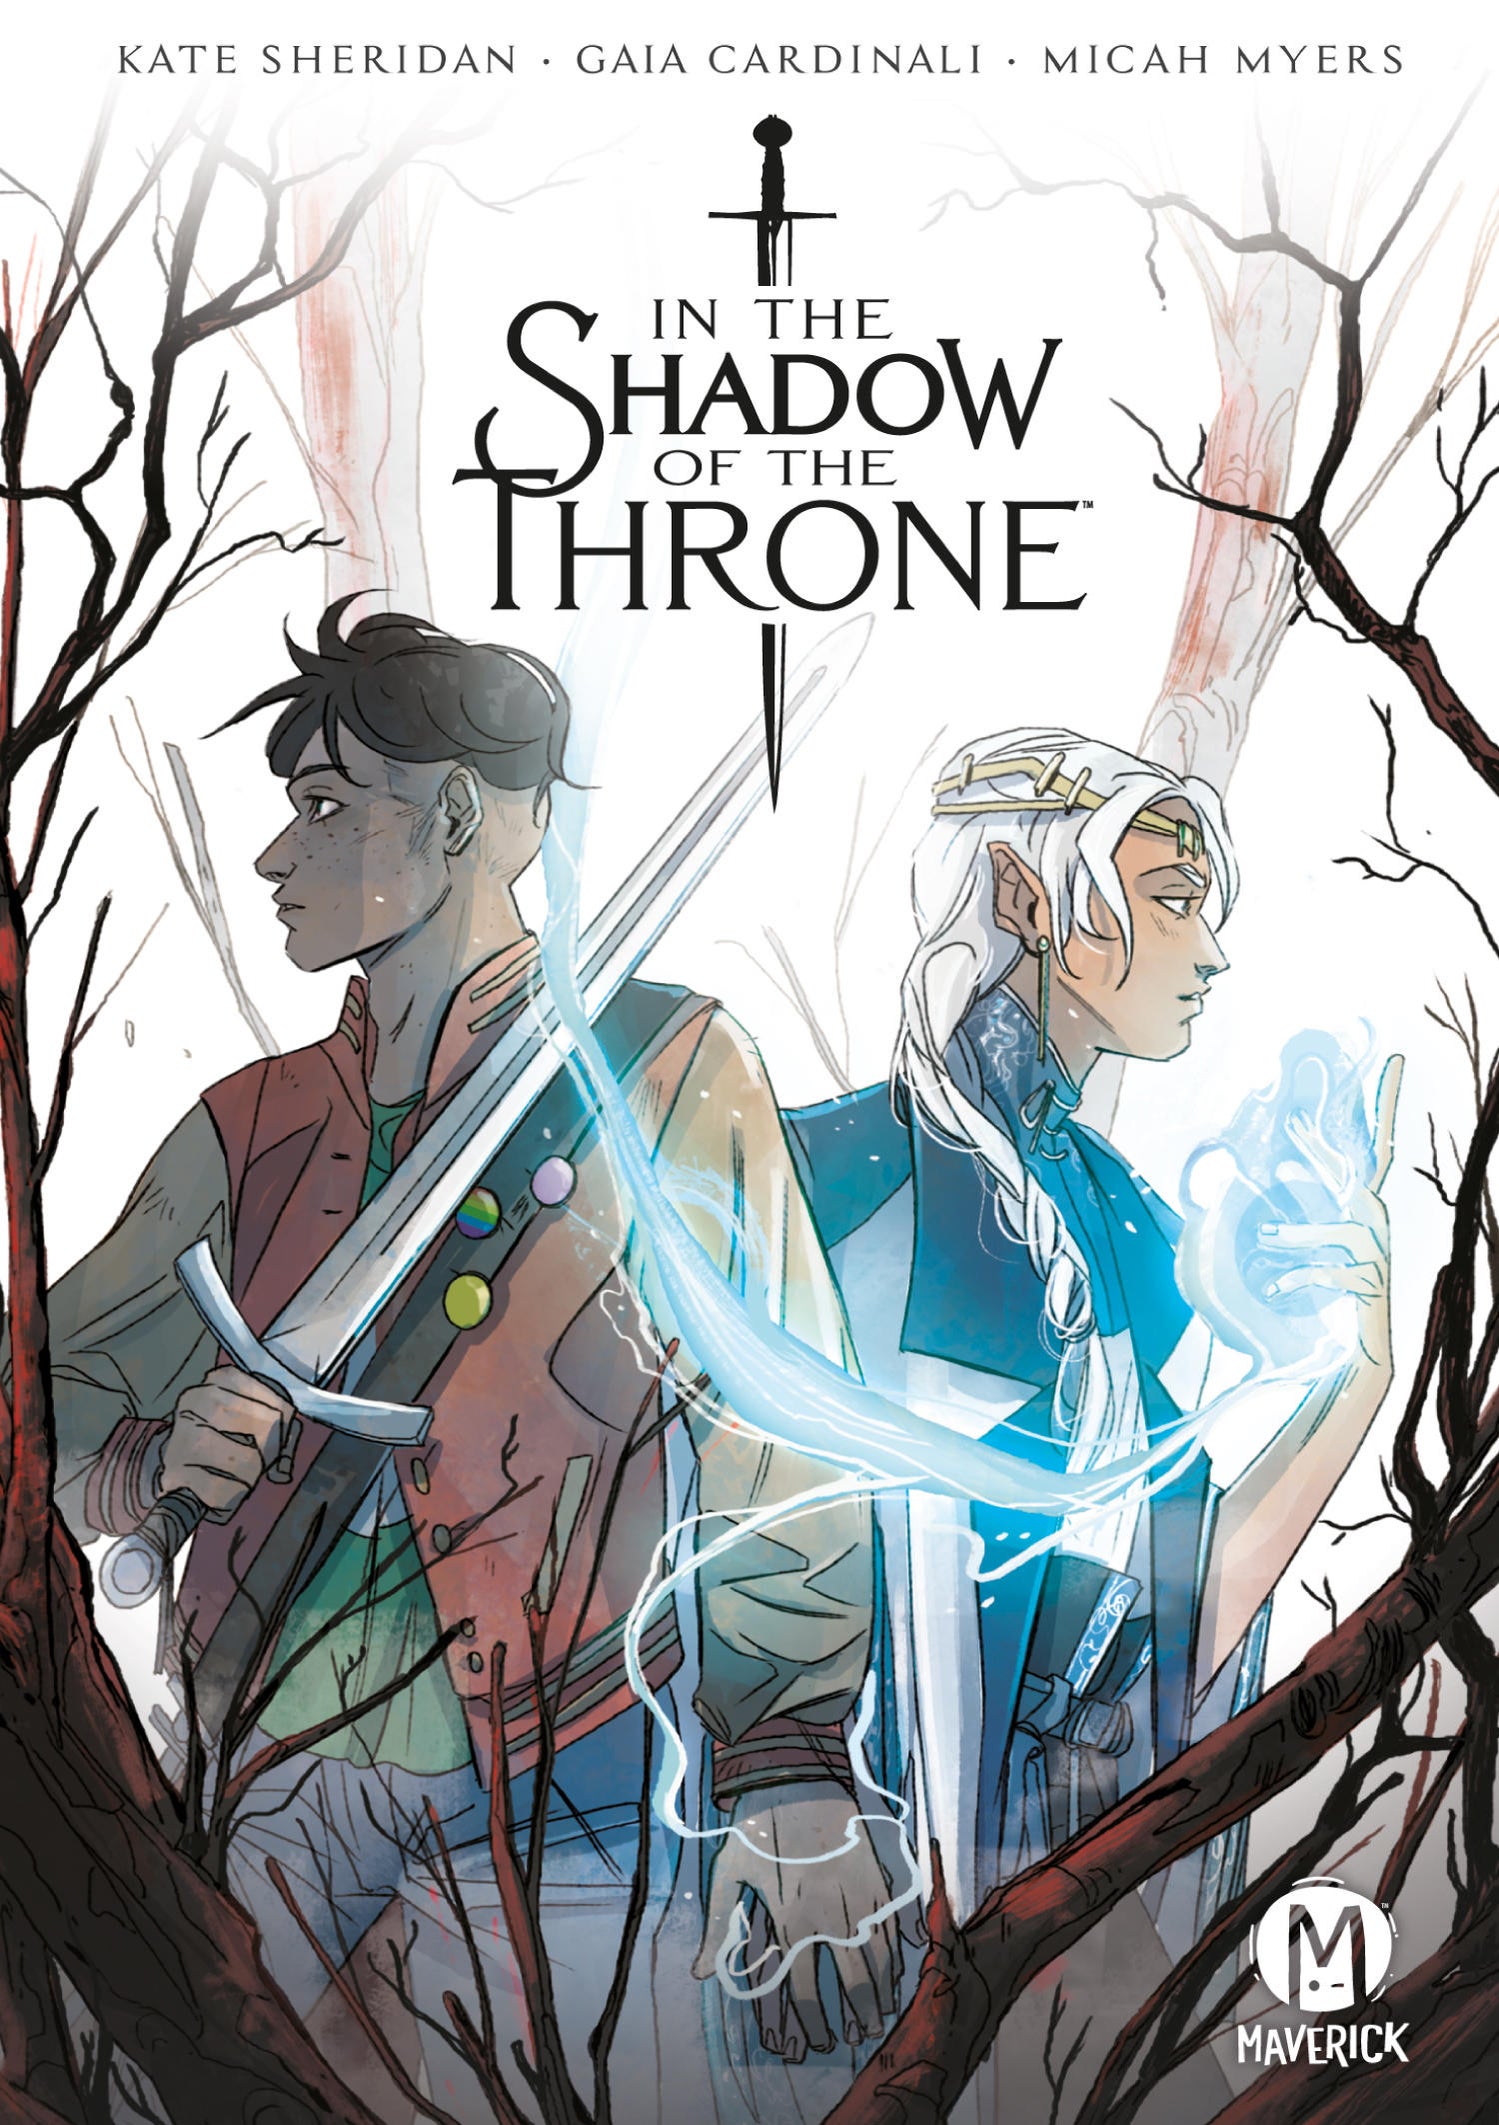 in-the-shadow-of-the-throne-cover.jpg